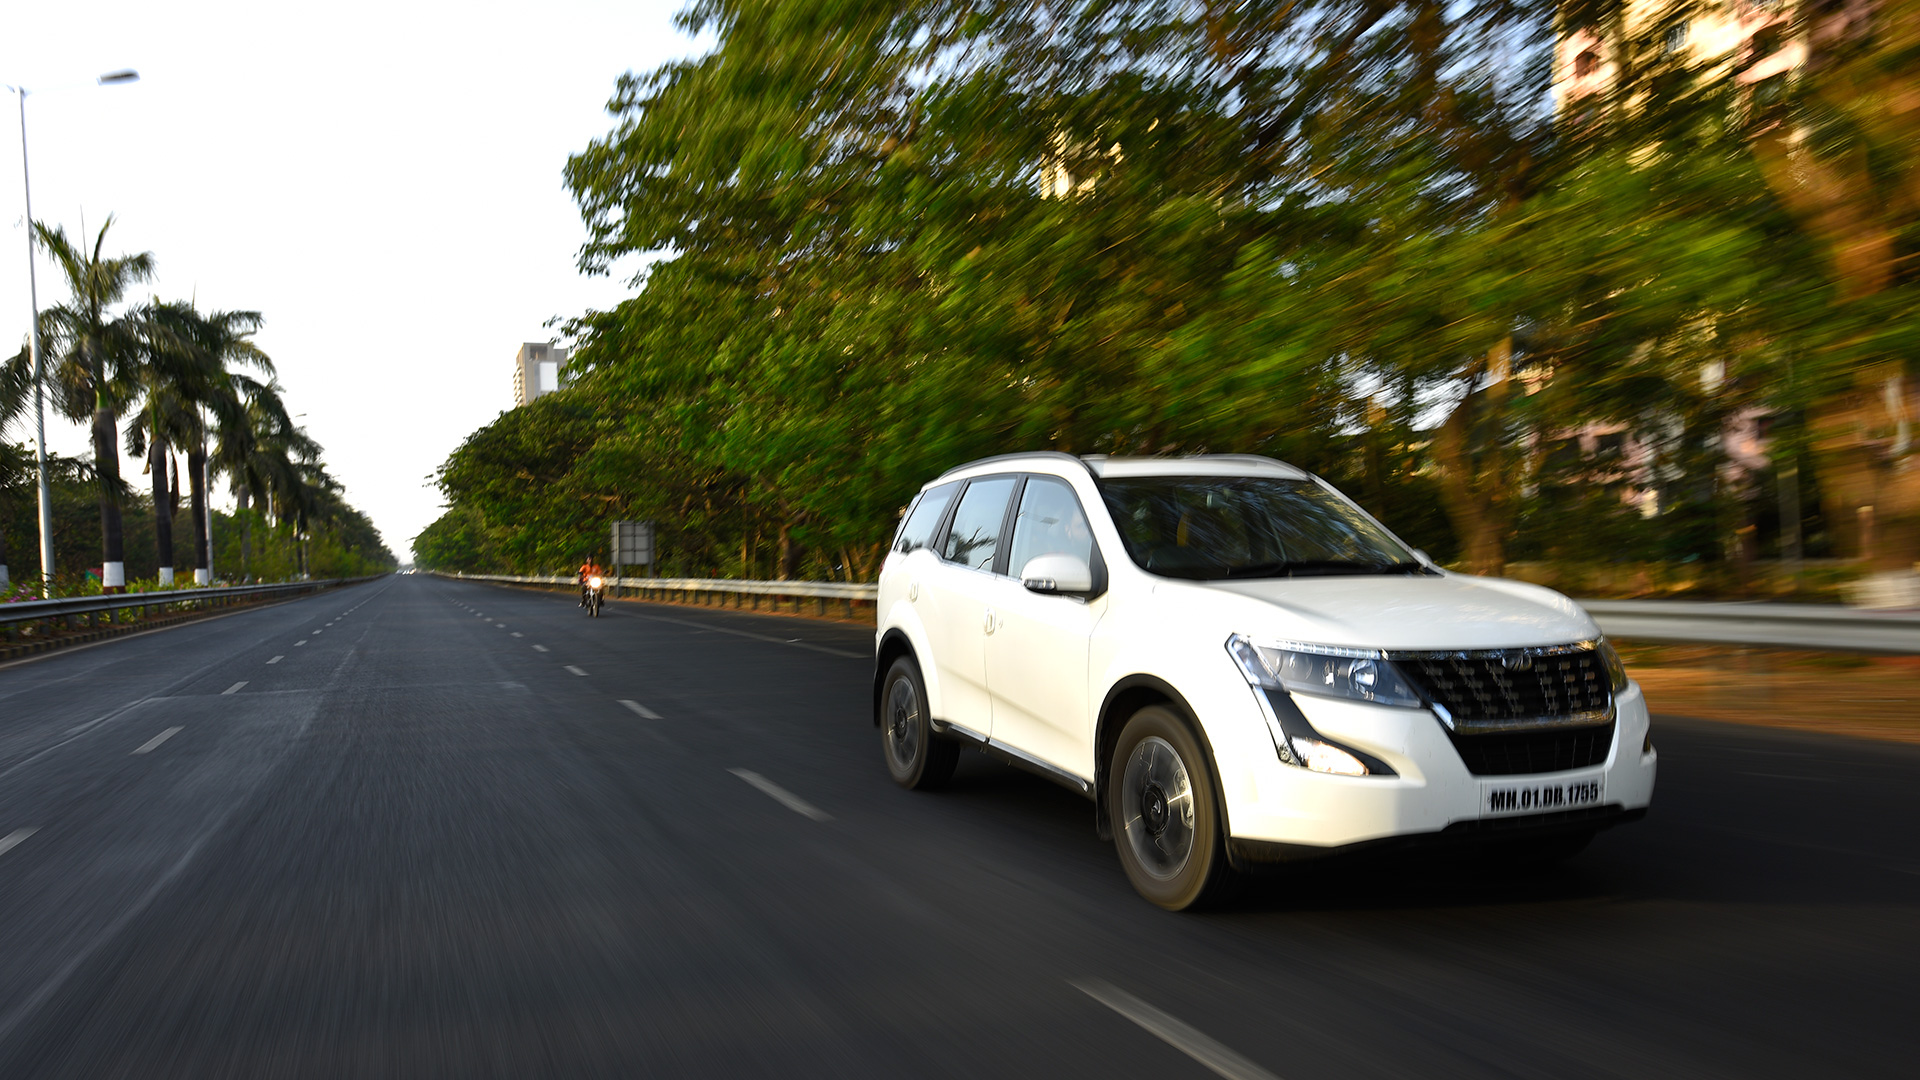 Gallery - New Xuv 500 Wallpapers Hd , HD Wallpaper & Backgrounds